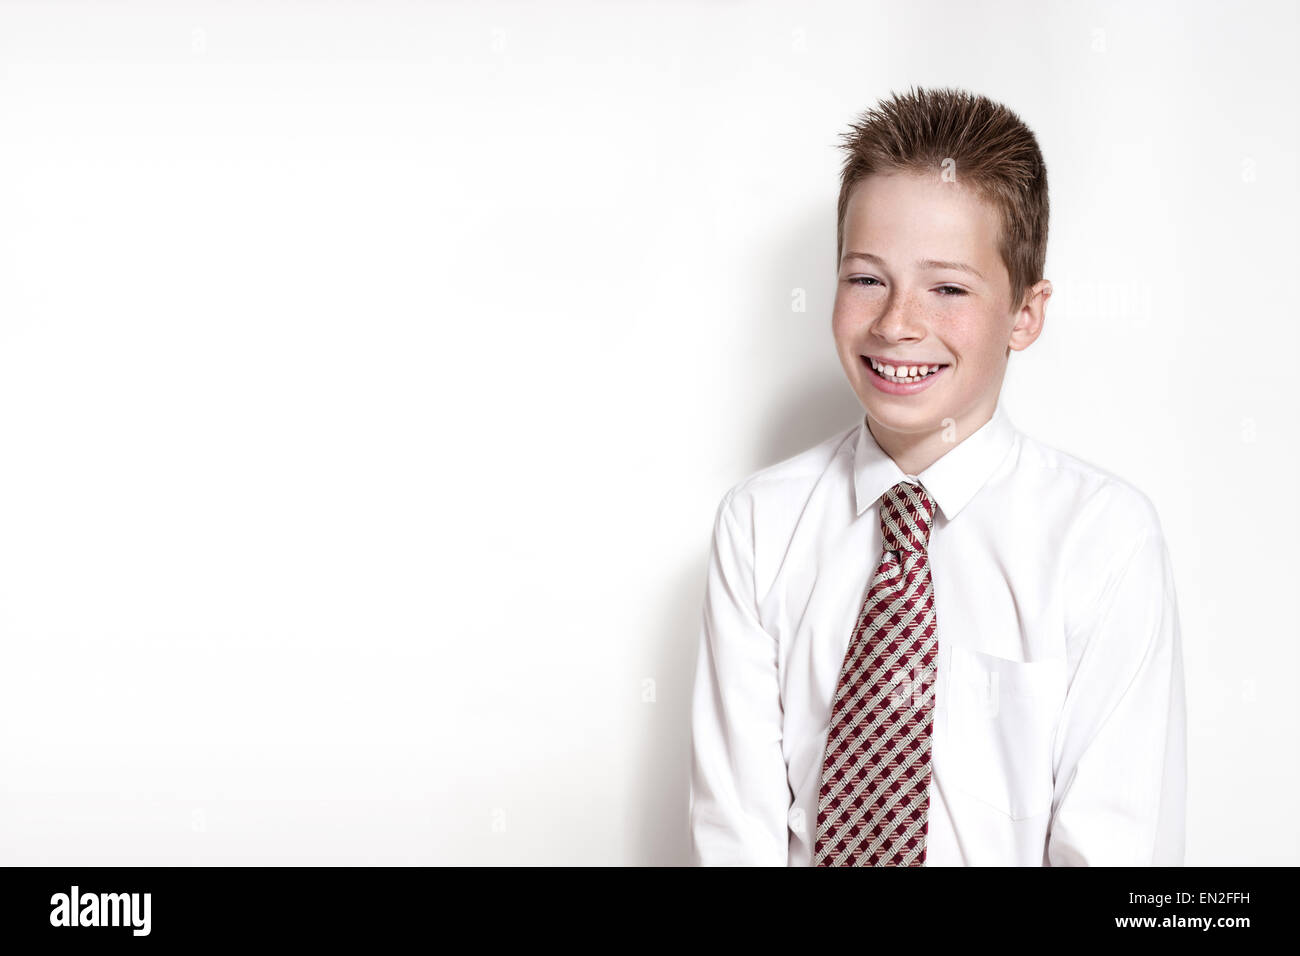 Emotional portrait of smiling boy with tie Stock Photo